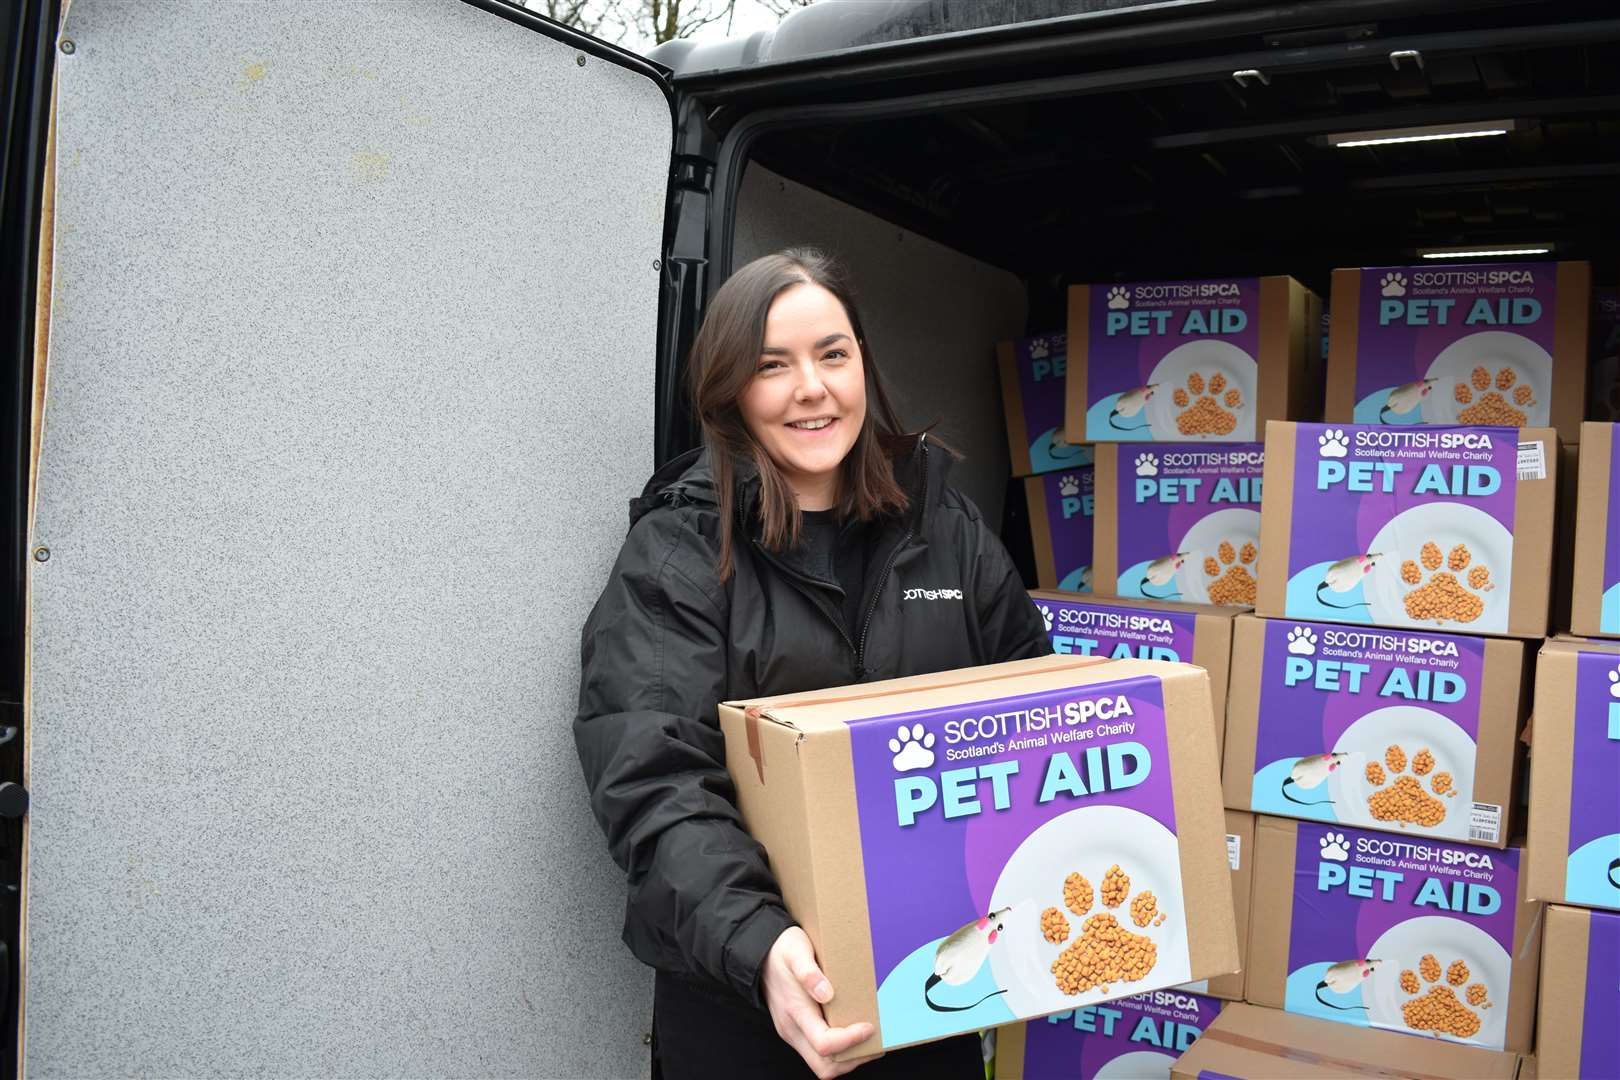 The Scottish SPCA plans to expand its Pet Aid service.